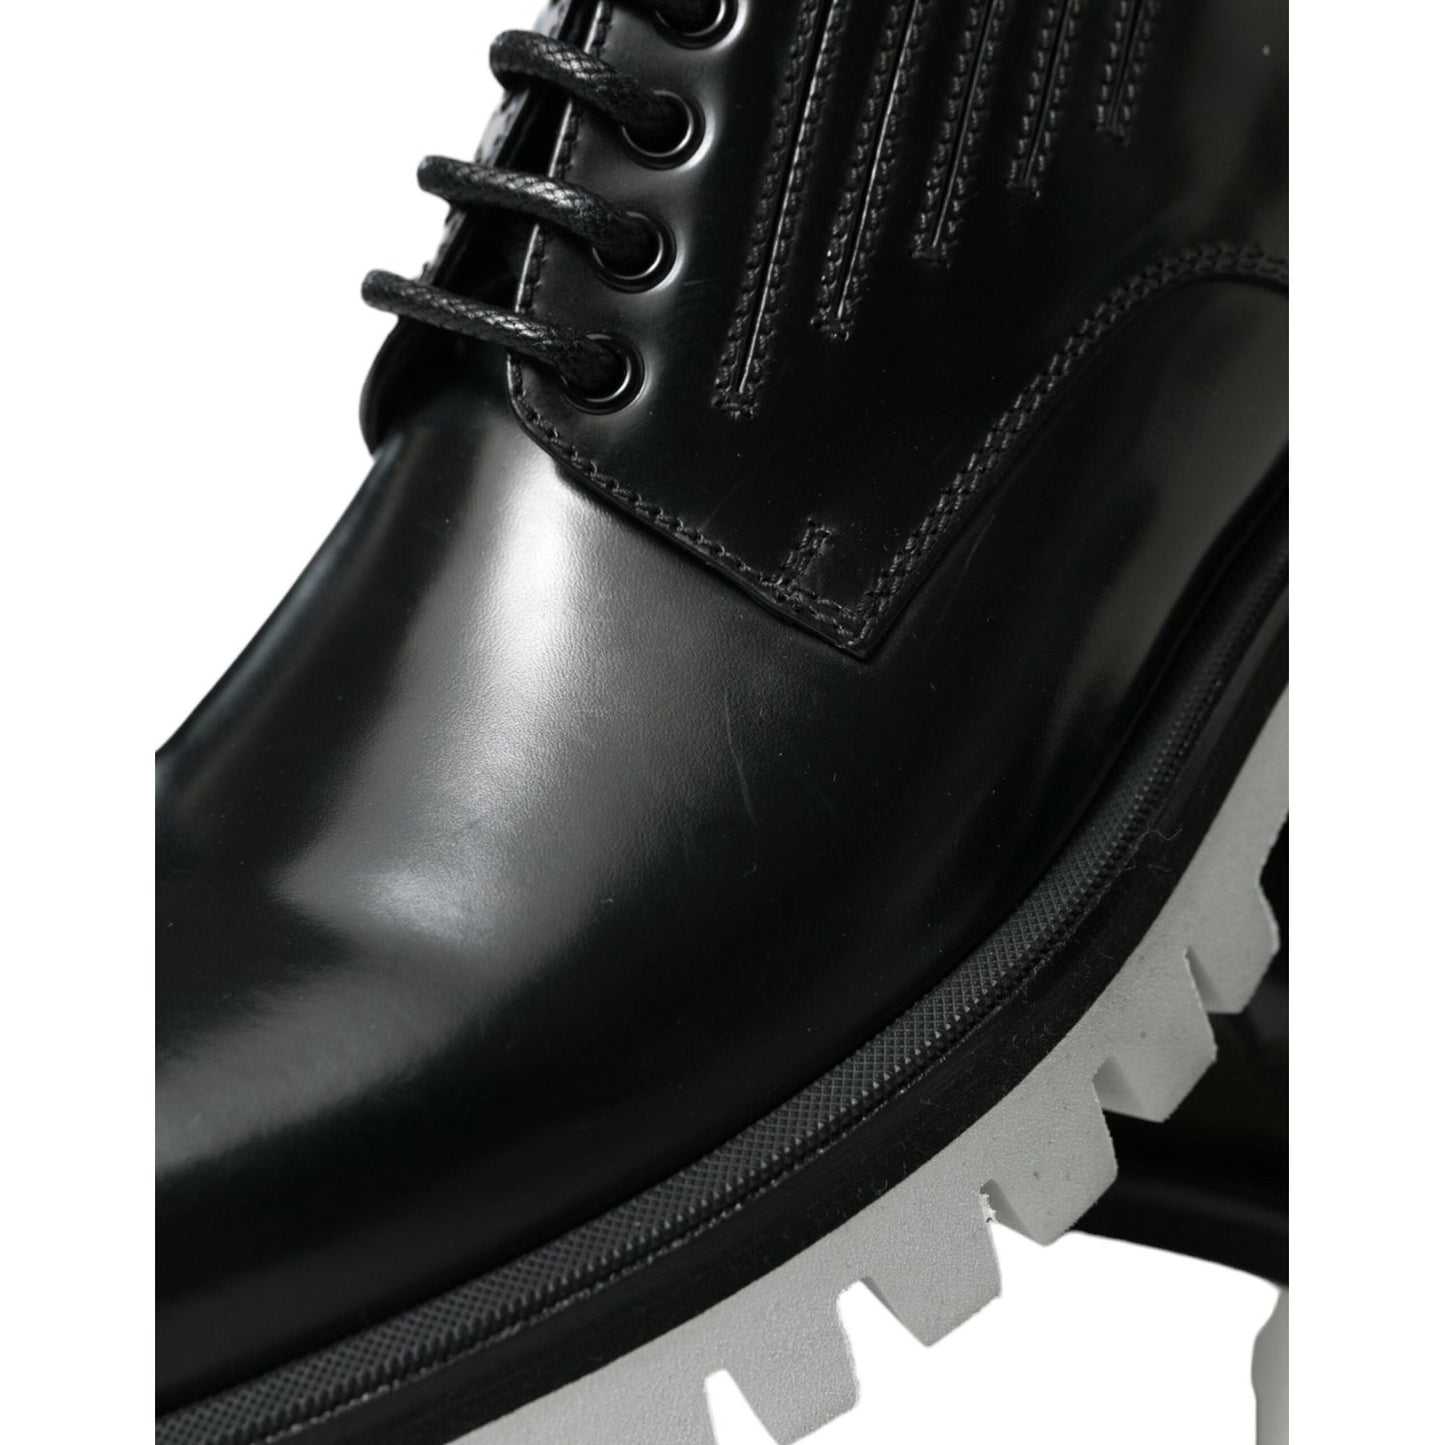 Dolce & Gabbana Sophisticated Black and White Leather Derby Shoes black-white-leather-lace-up-derby-dress-shoes